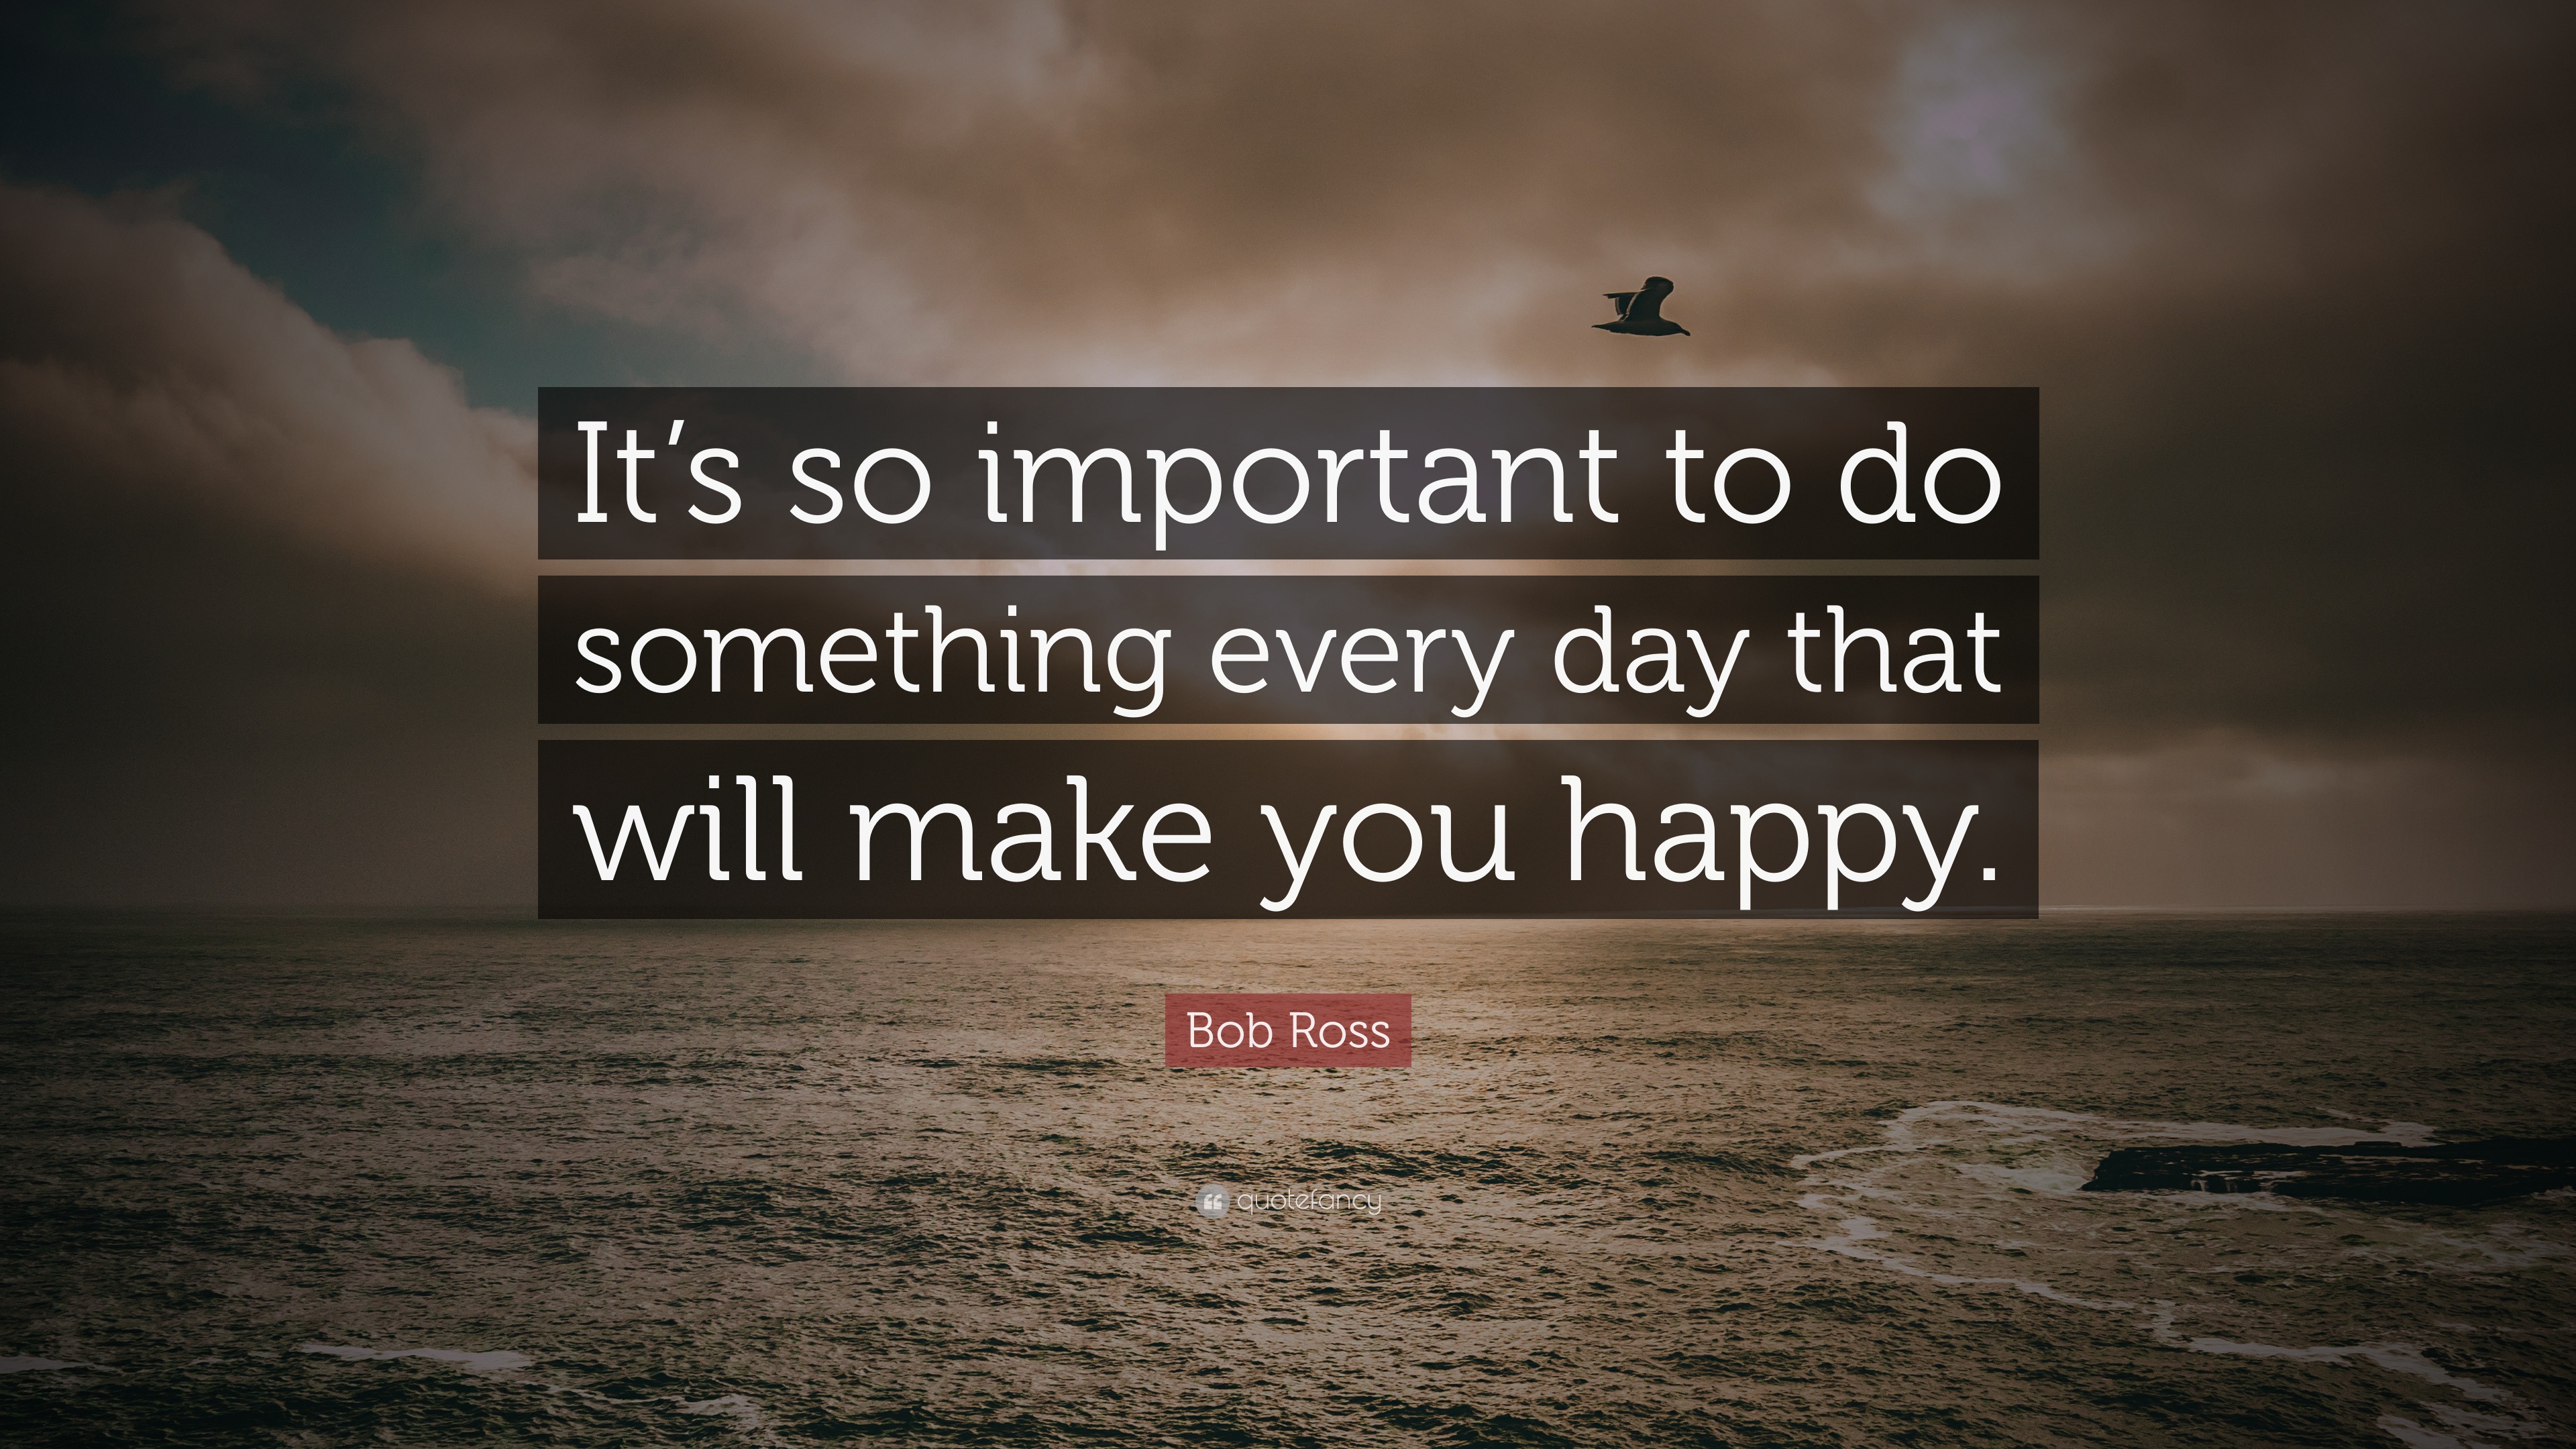 what are the things that are important to you to make you happy in life